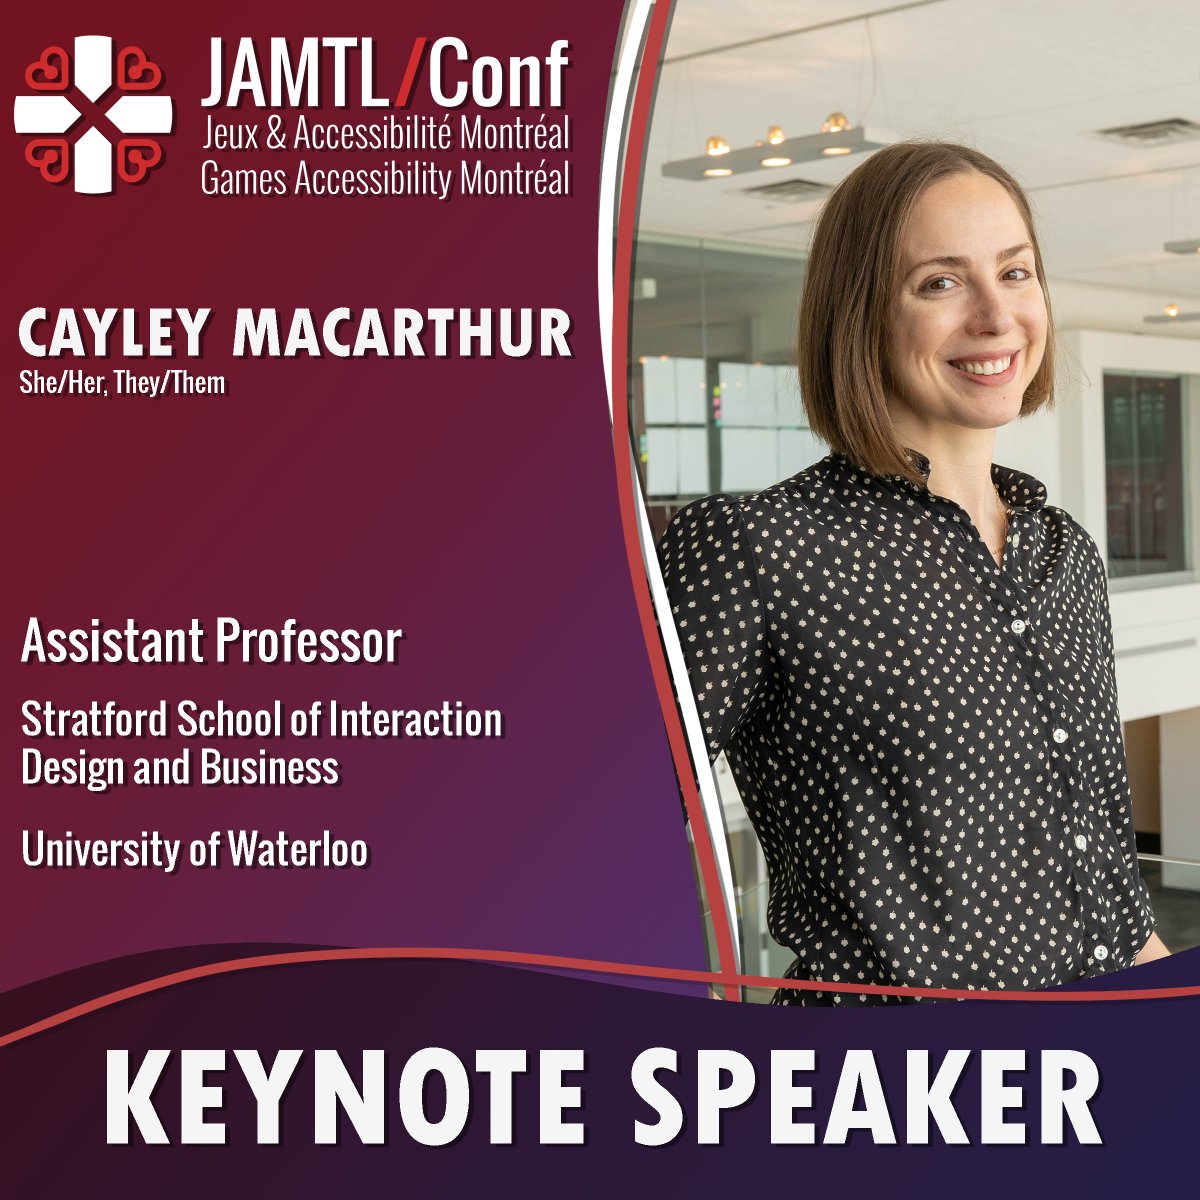 Keynote speaker alert! We are pleased to announce Cayley MacArthur @caylery from @uwstratford as guest of honor for the @JAMTLConf. Dr. MacArthur will discuss game accessibility from an equity-centered approach on HCI, design, and UX. Interested? Register freely on Eventbrite.